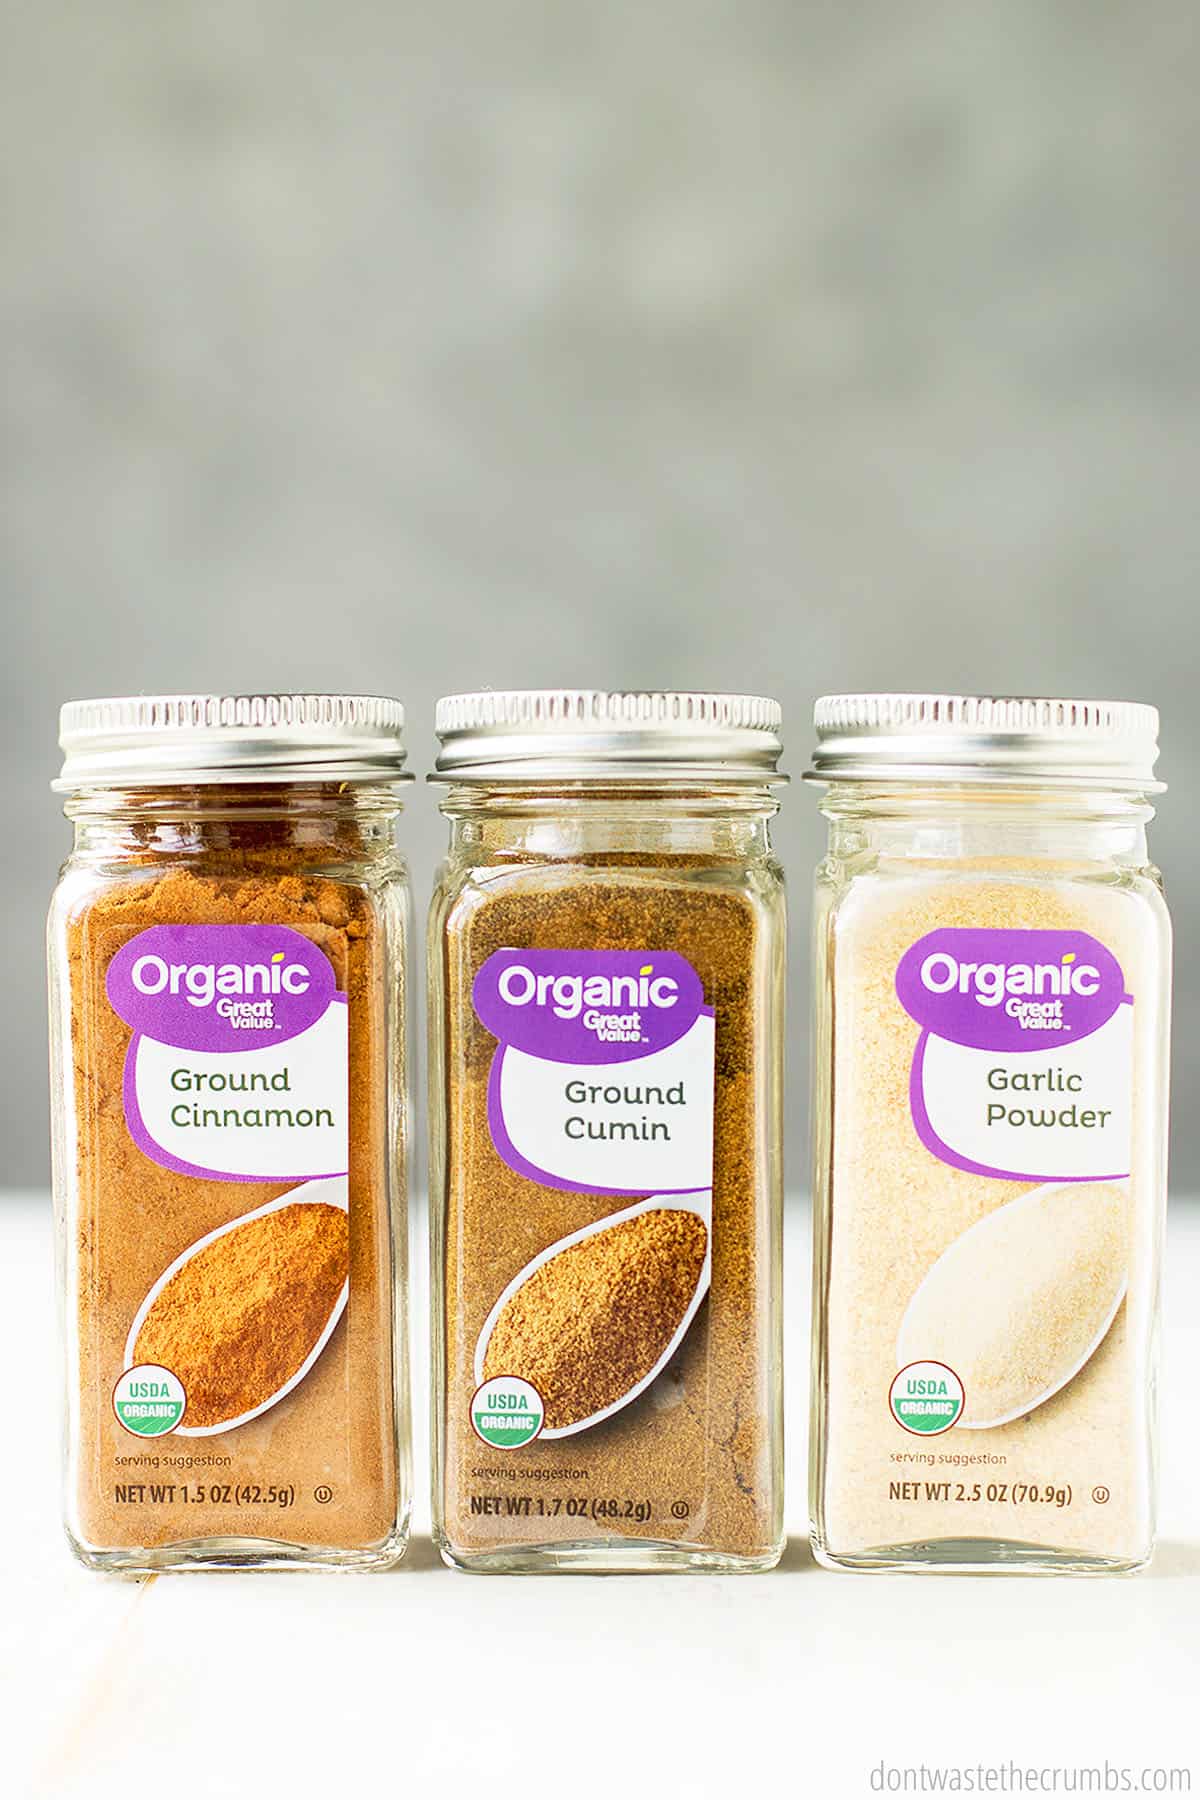 Conventional or Organic Spices - Don't Waste the Crumbs